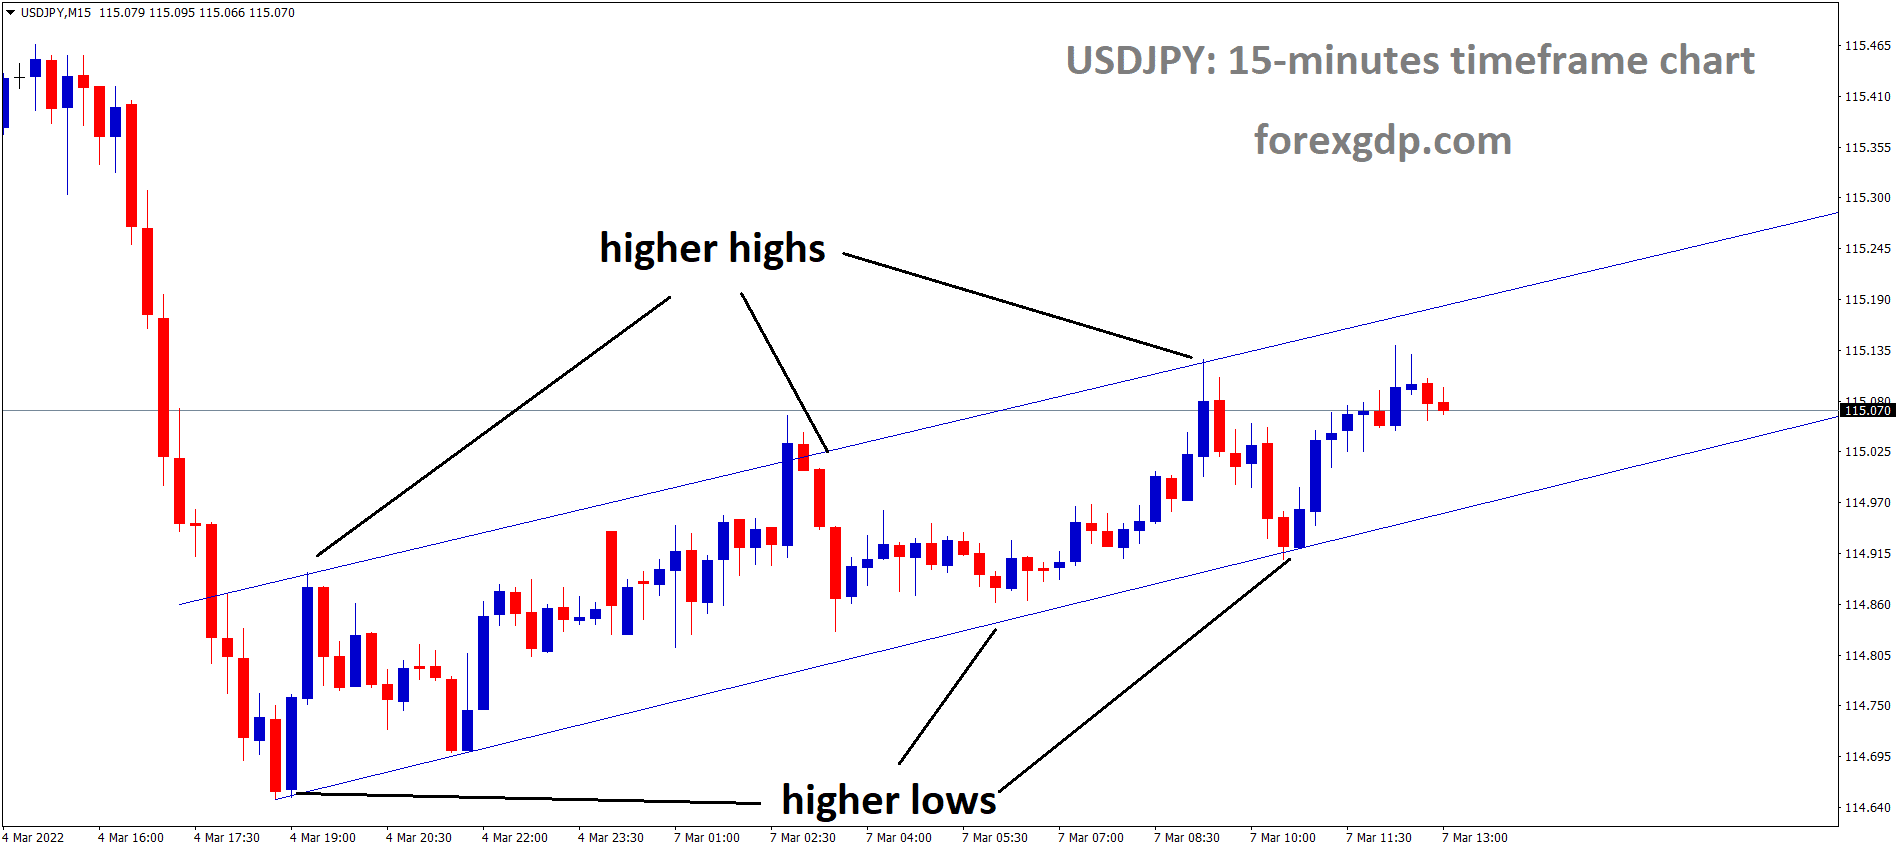 USDJPY is moving in an ascending channel and the market has reached the higher high area of the channel.